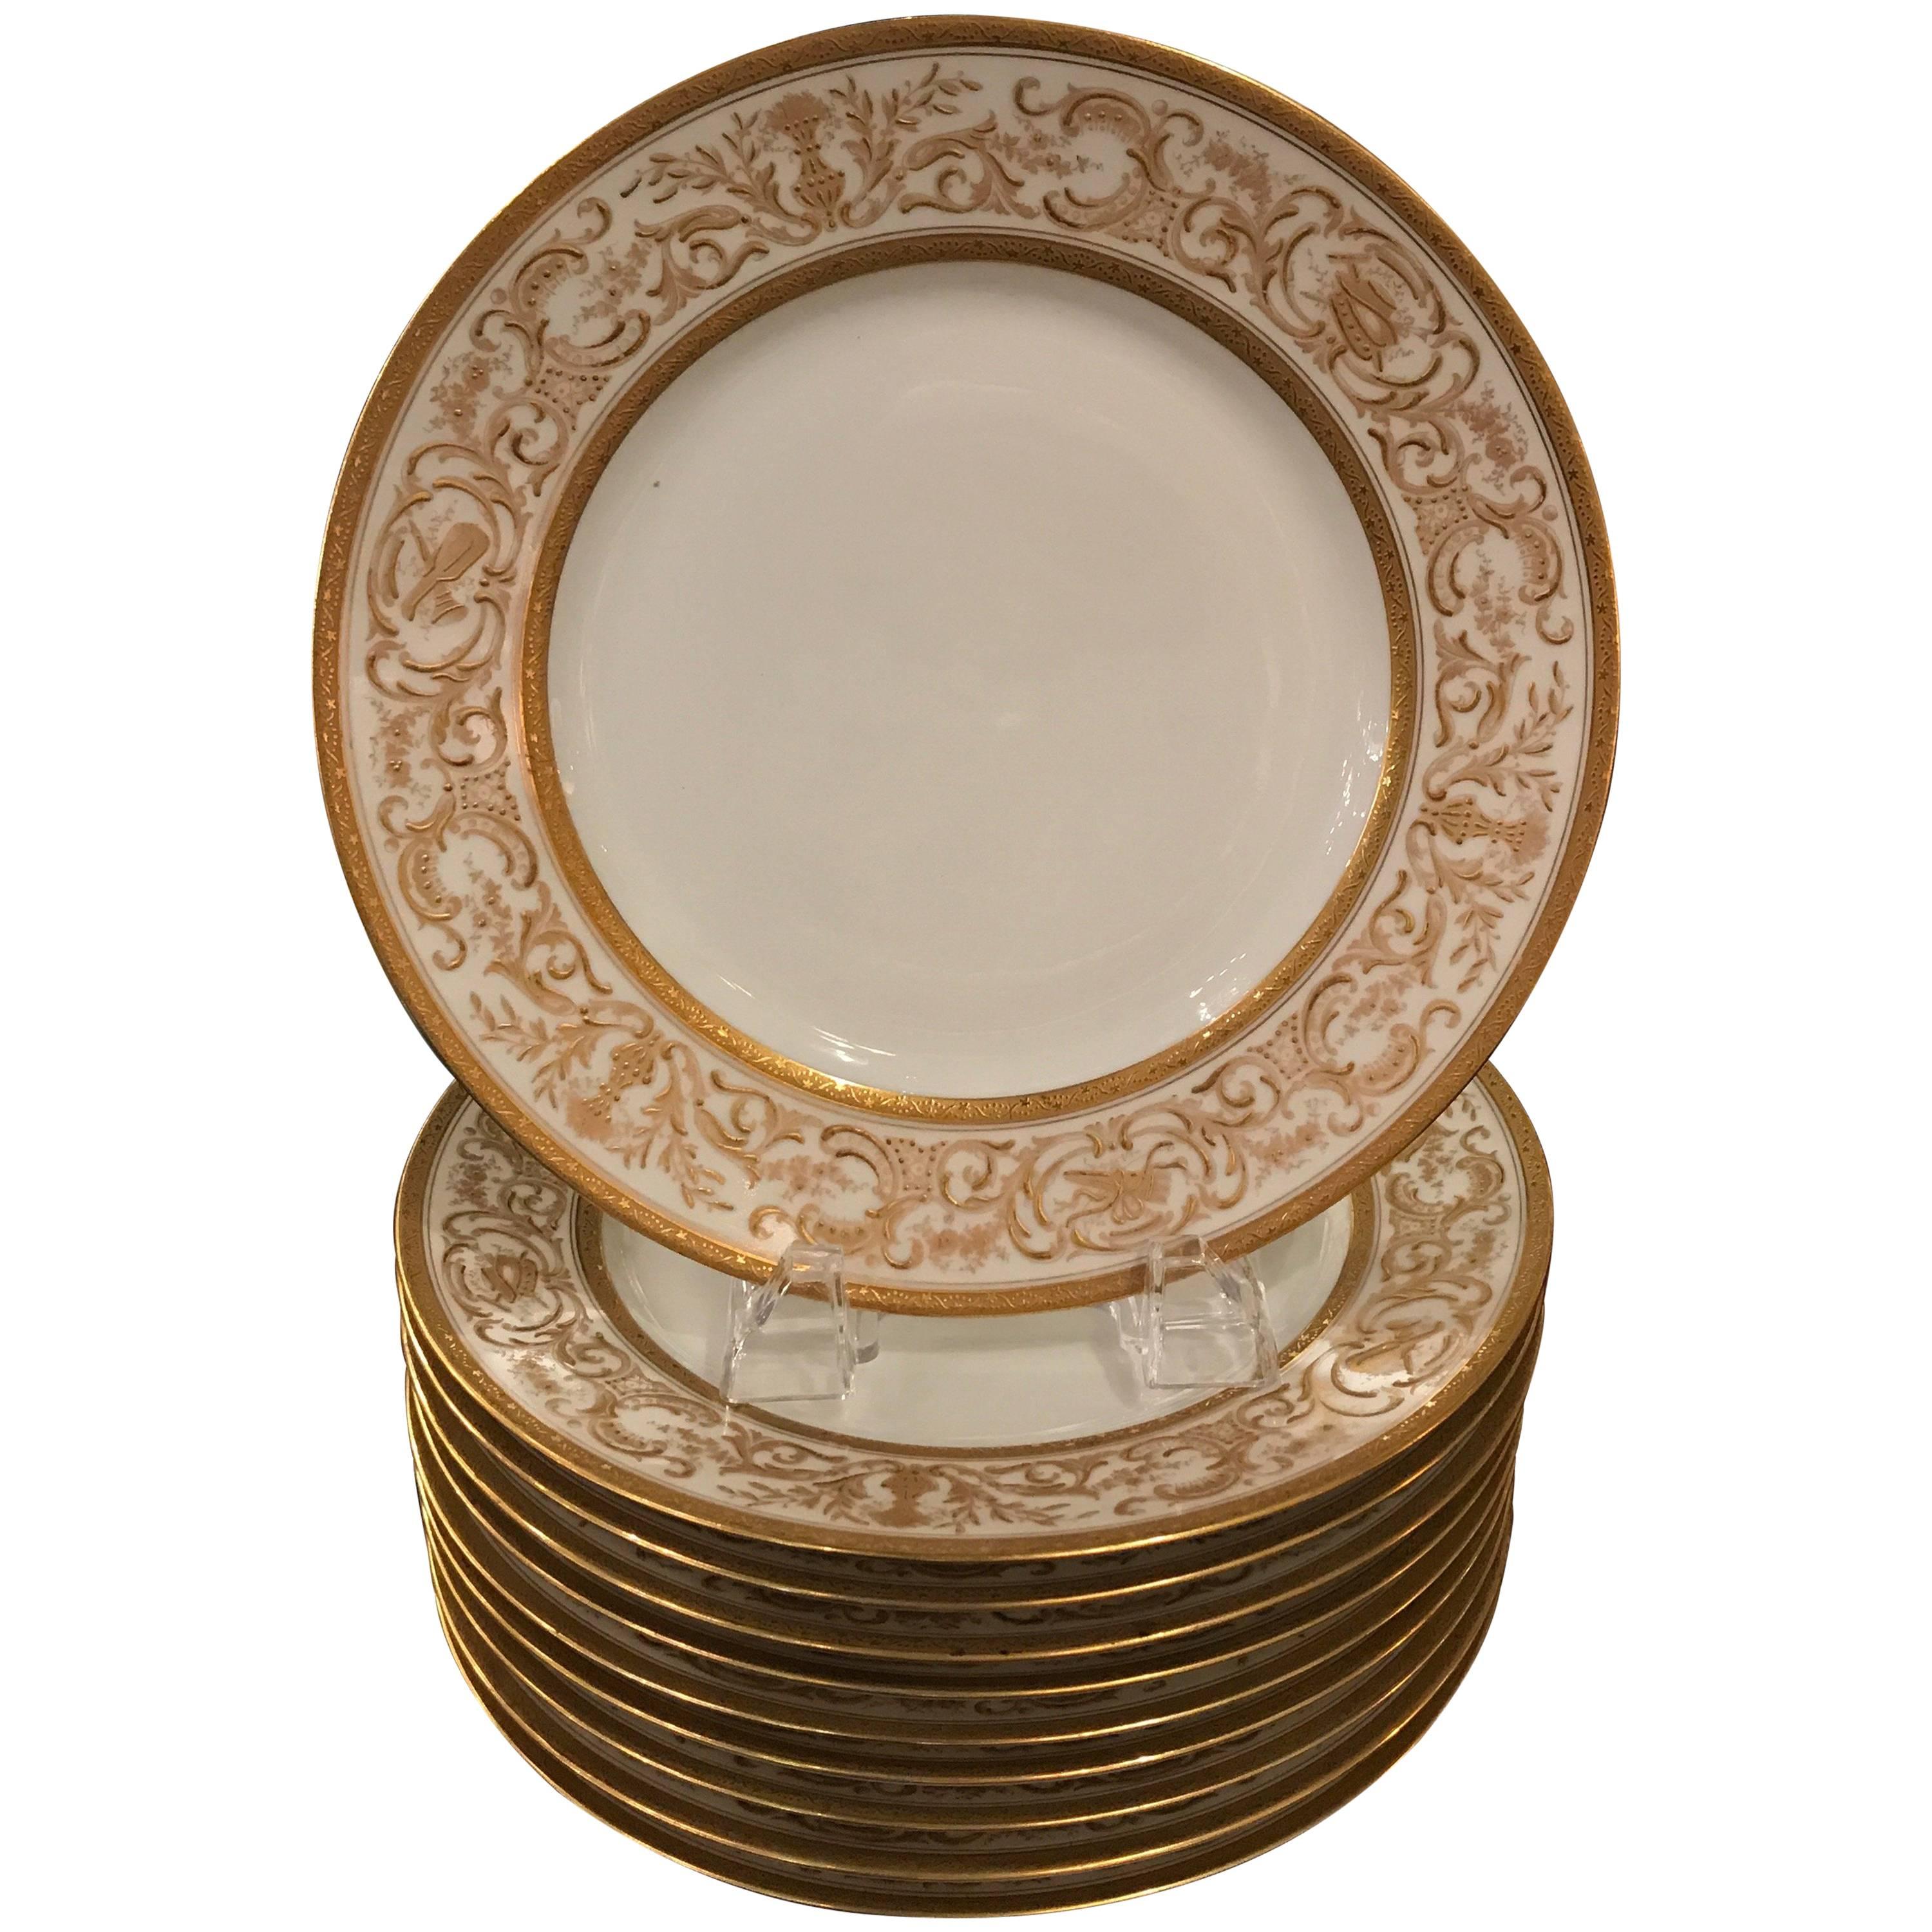 Set of Ten French Plates with Raised Gilt Borders